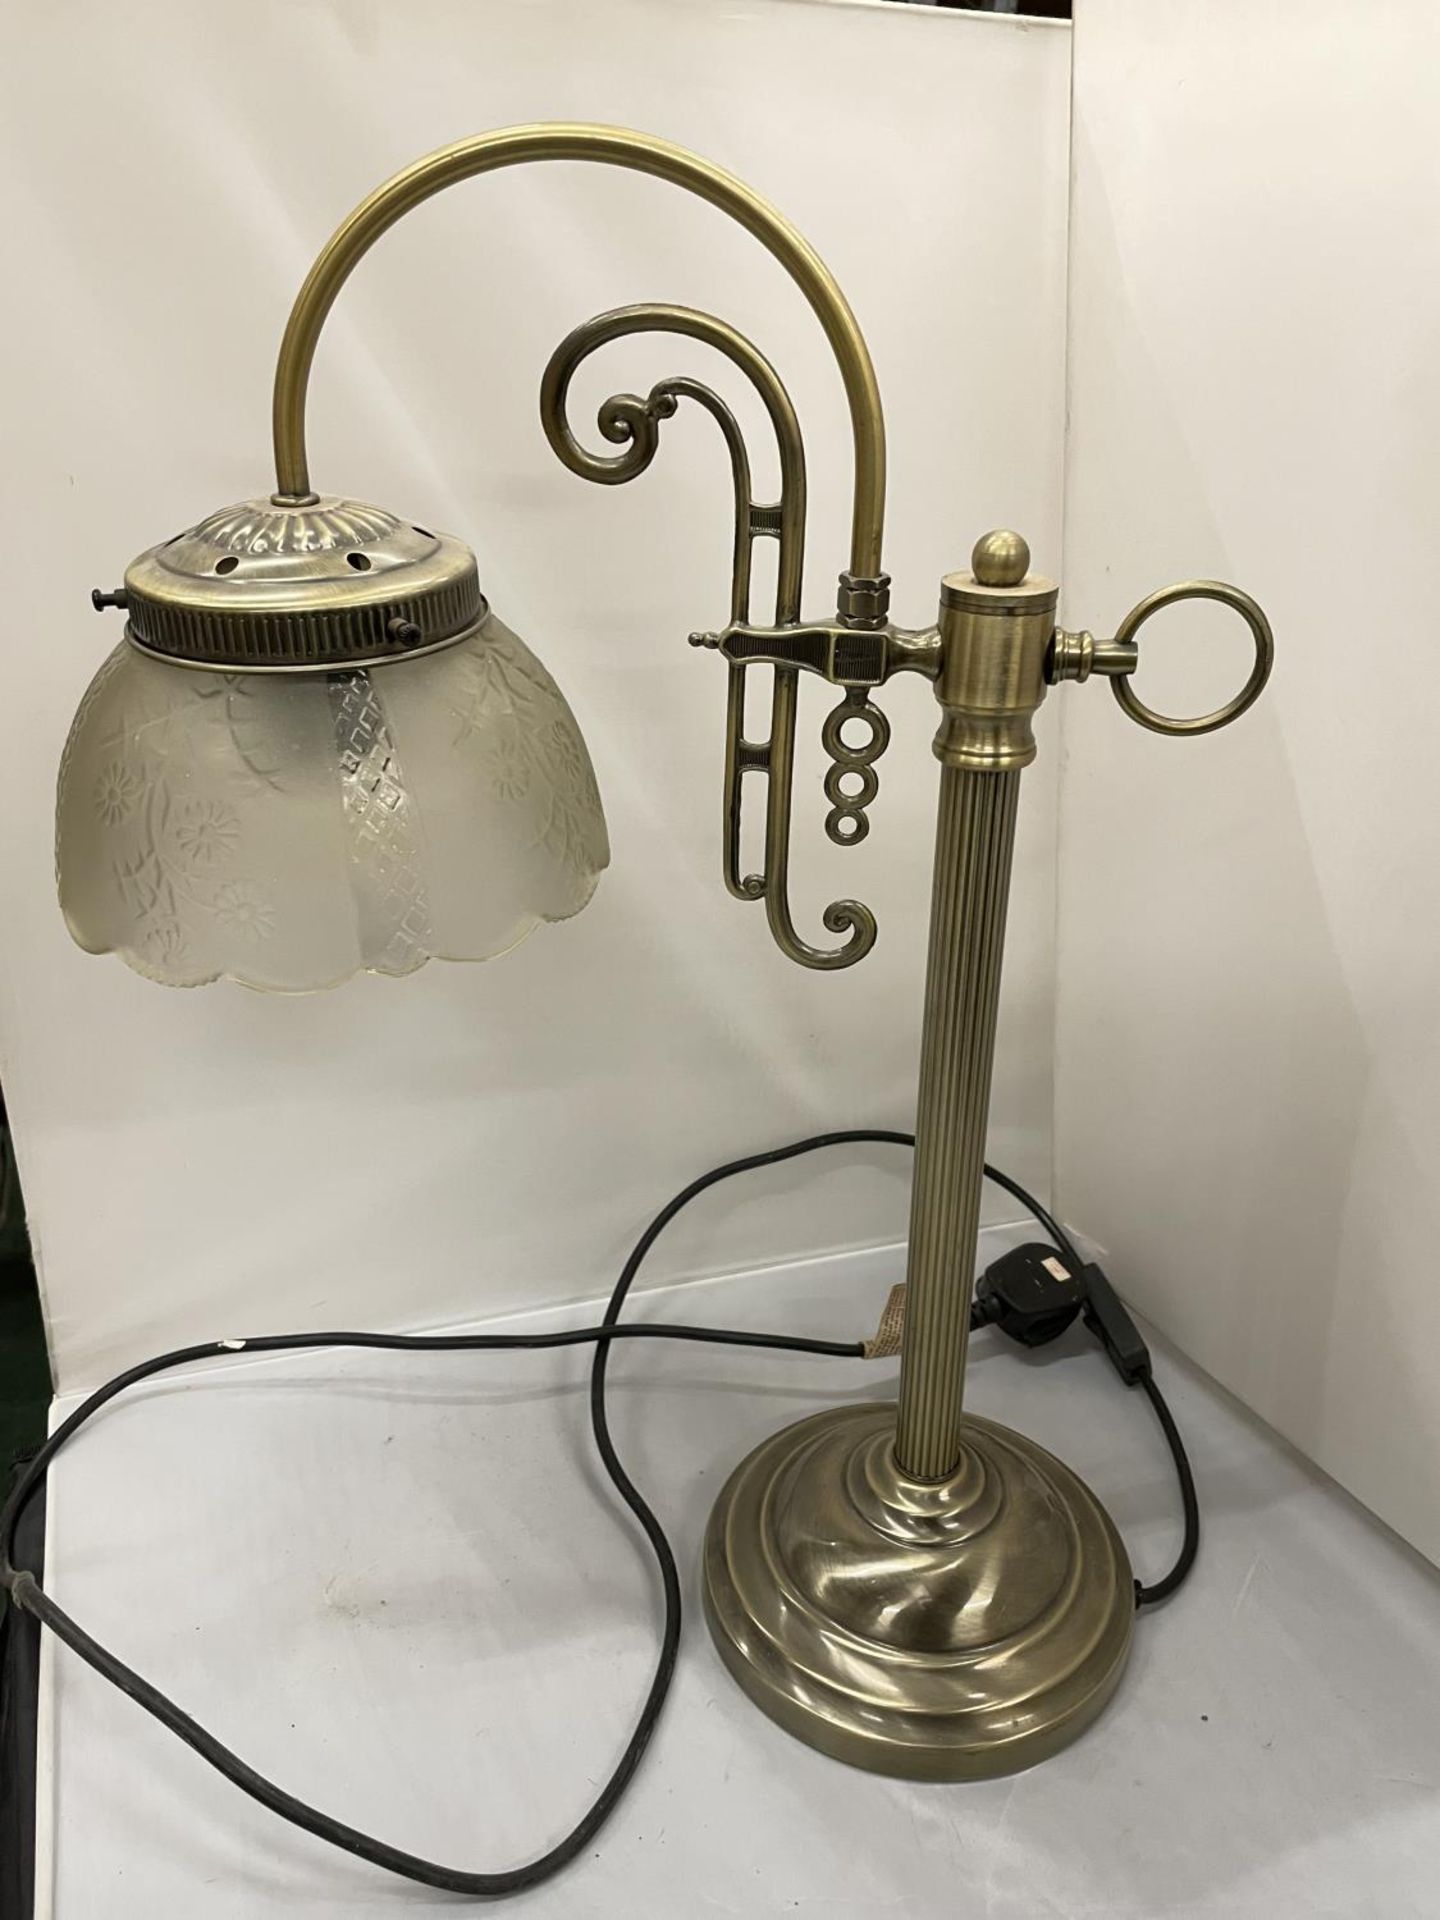 AN ANTIQUE STYLE BRASS DESK LAMP WITH GLASS SHADE